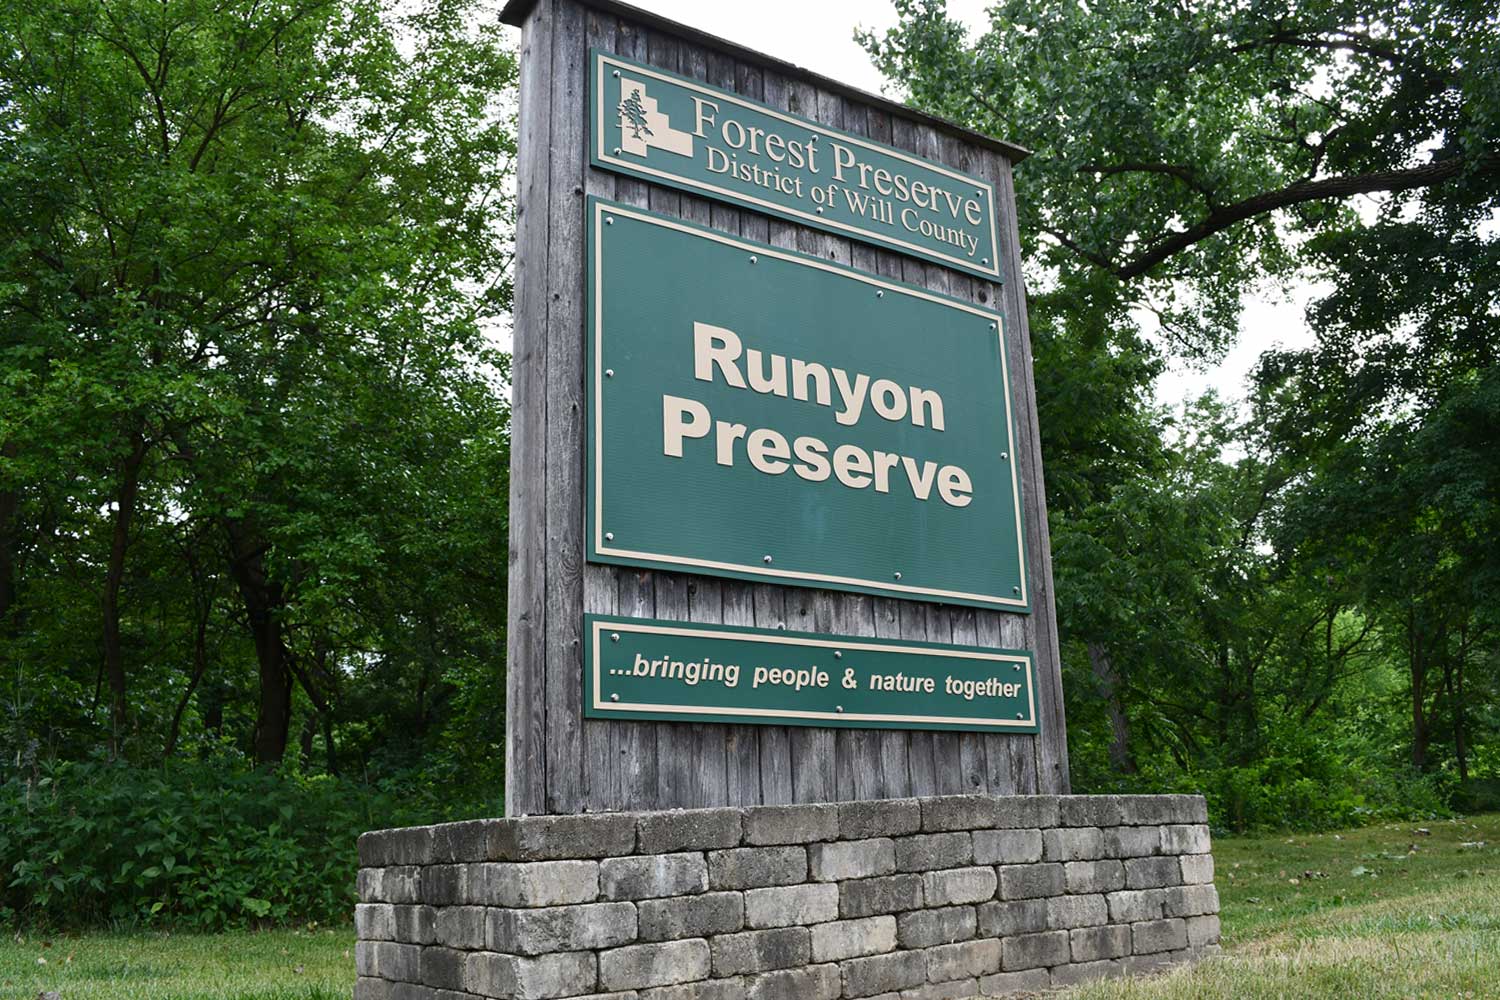 Preserve sign in front of trees.